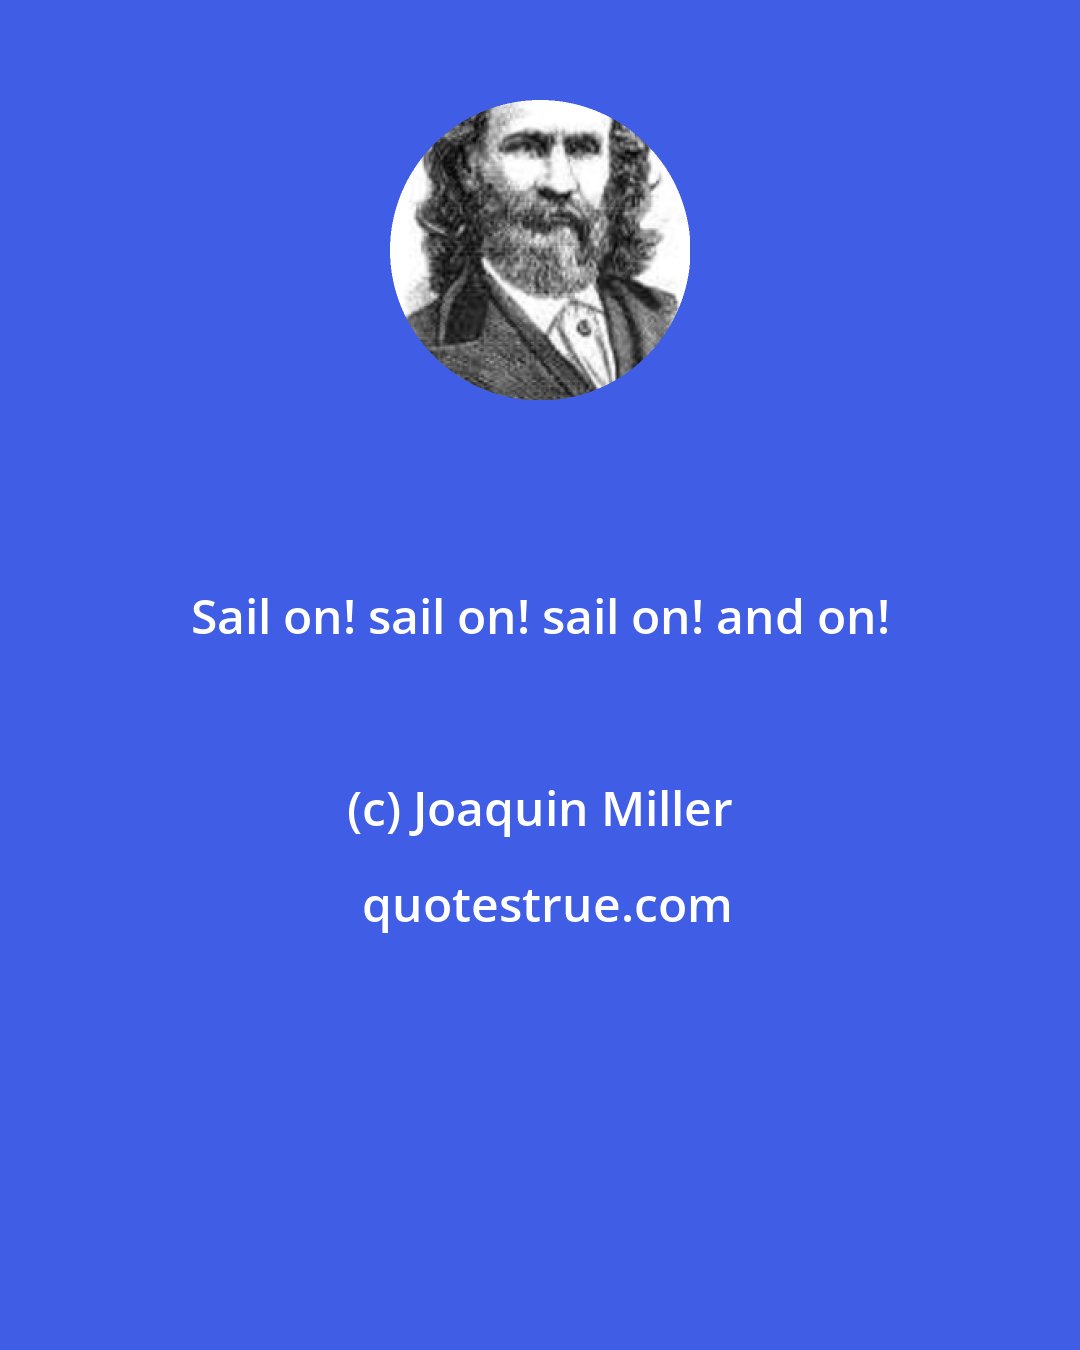 Joaquin Miller: Sail on! sail on! sail on! and on!